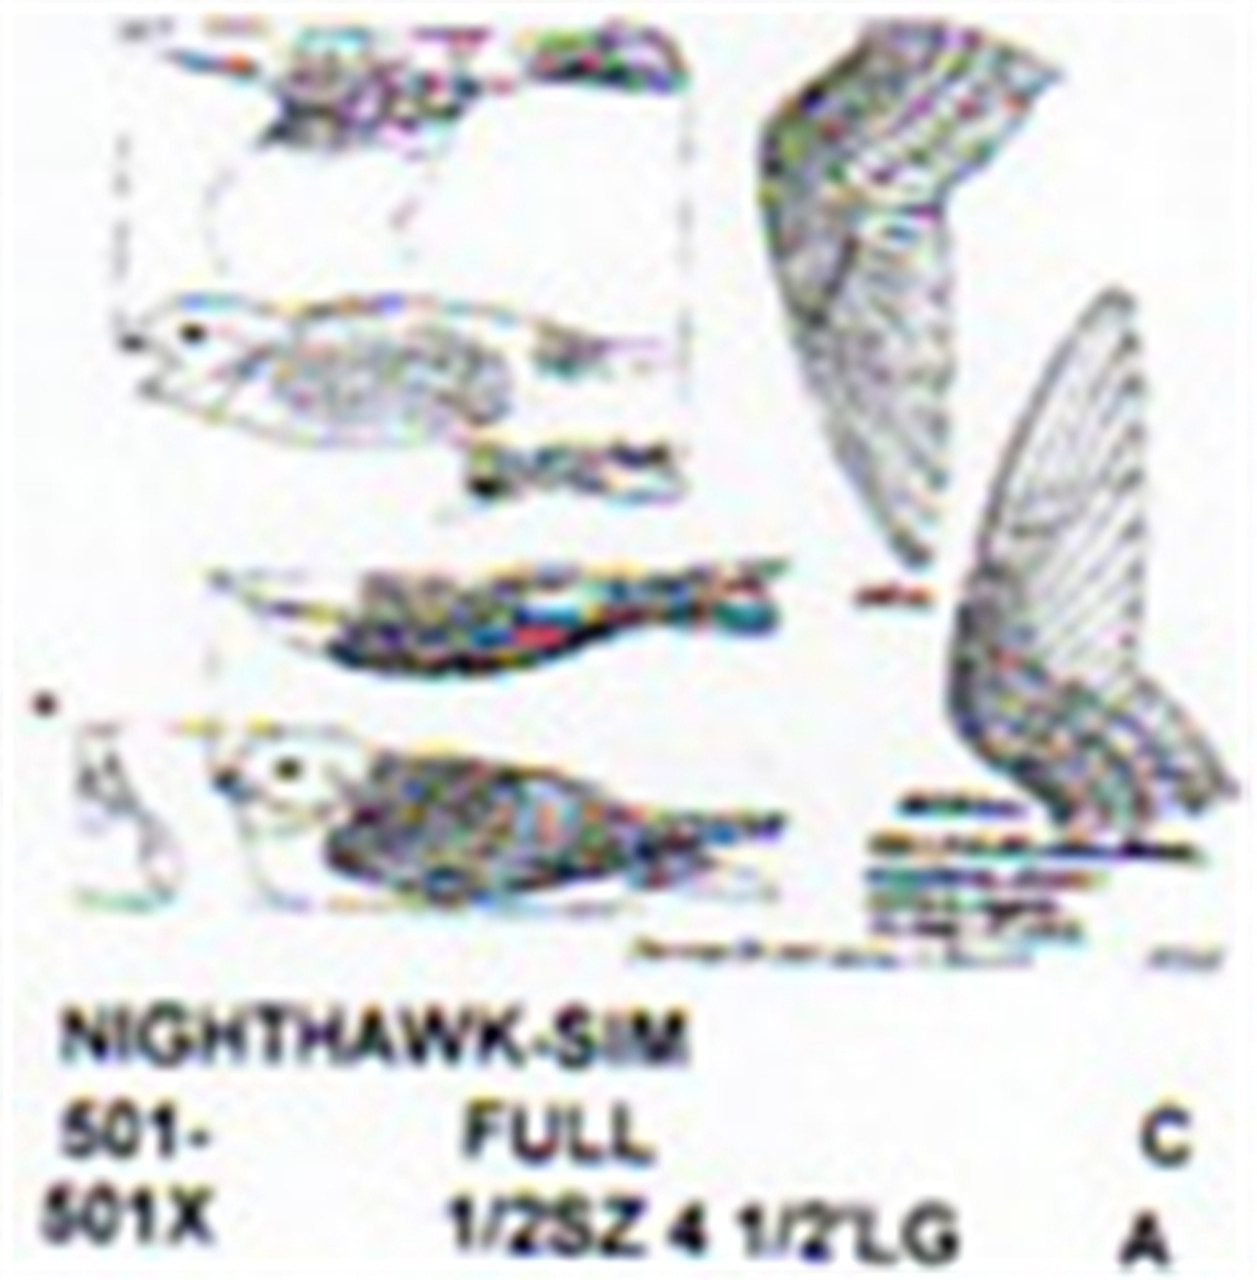 Nighthawk Setting/Flying Carving Pattern shown with two profiles, one setting, and one in flight.